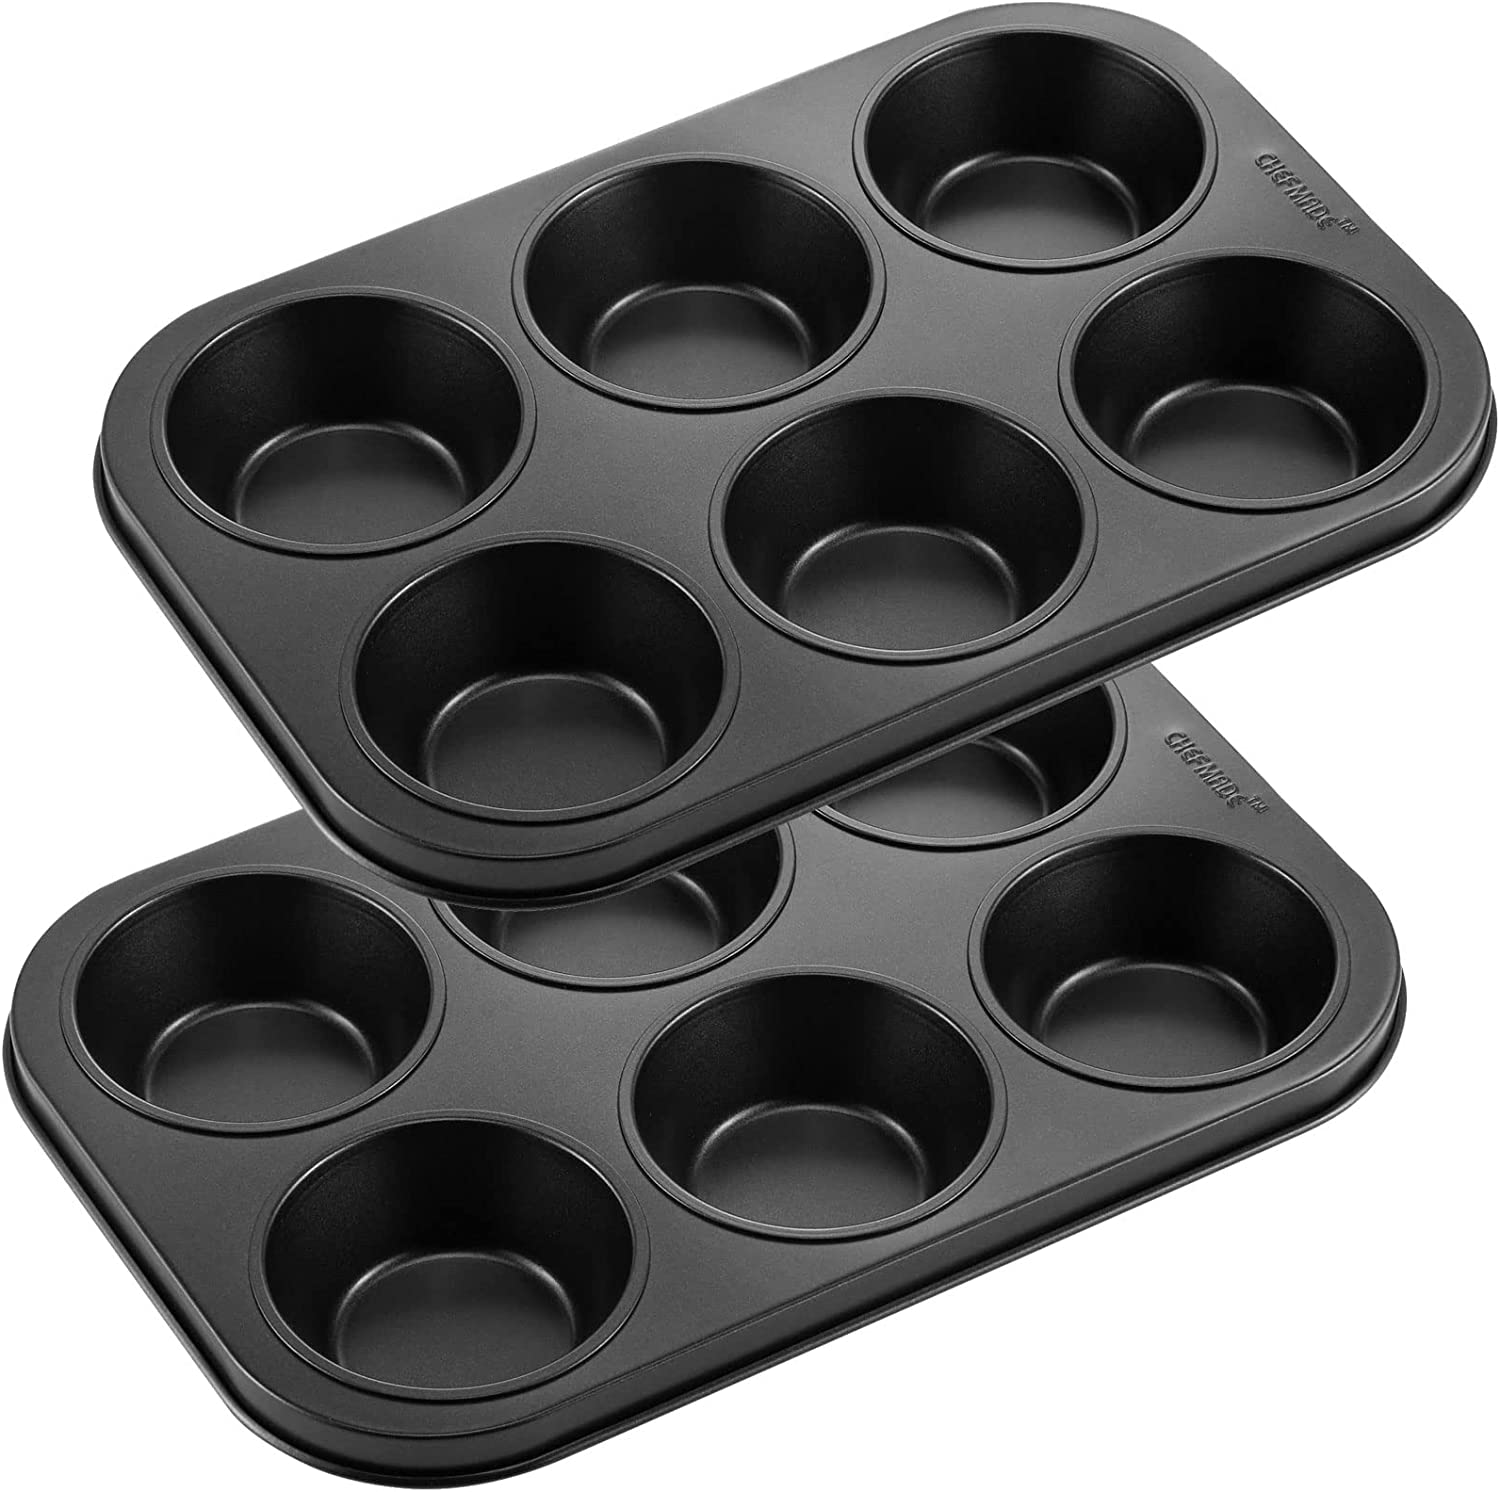 Muffin Pan Super Mini 20 Well - CHEFMADE official store